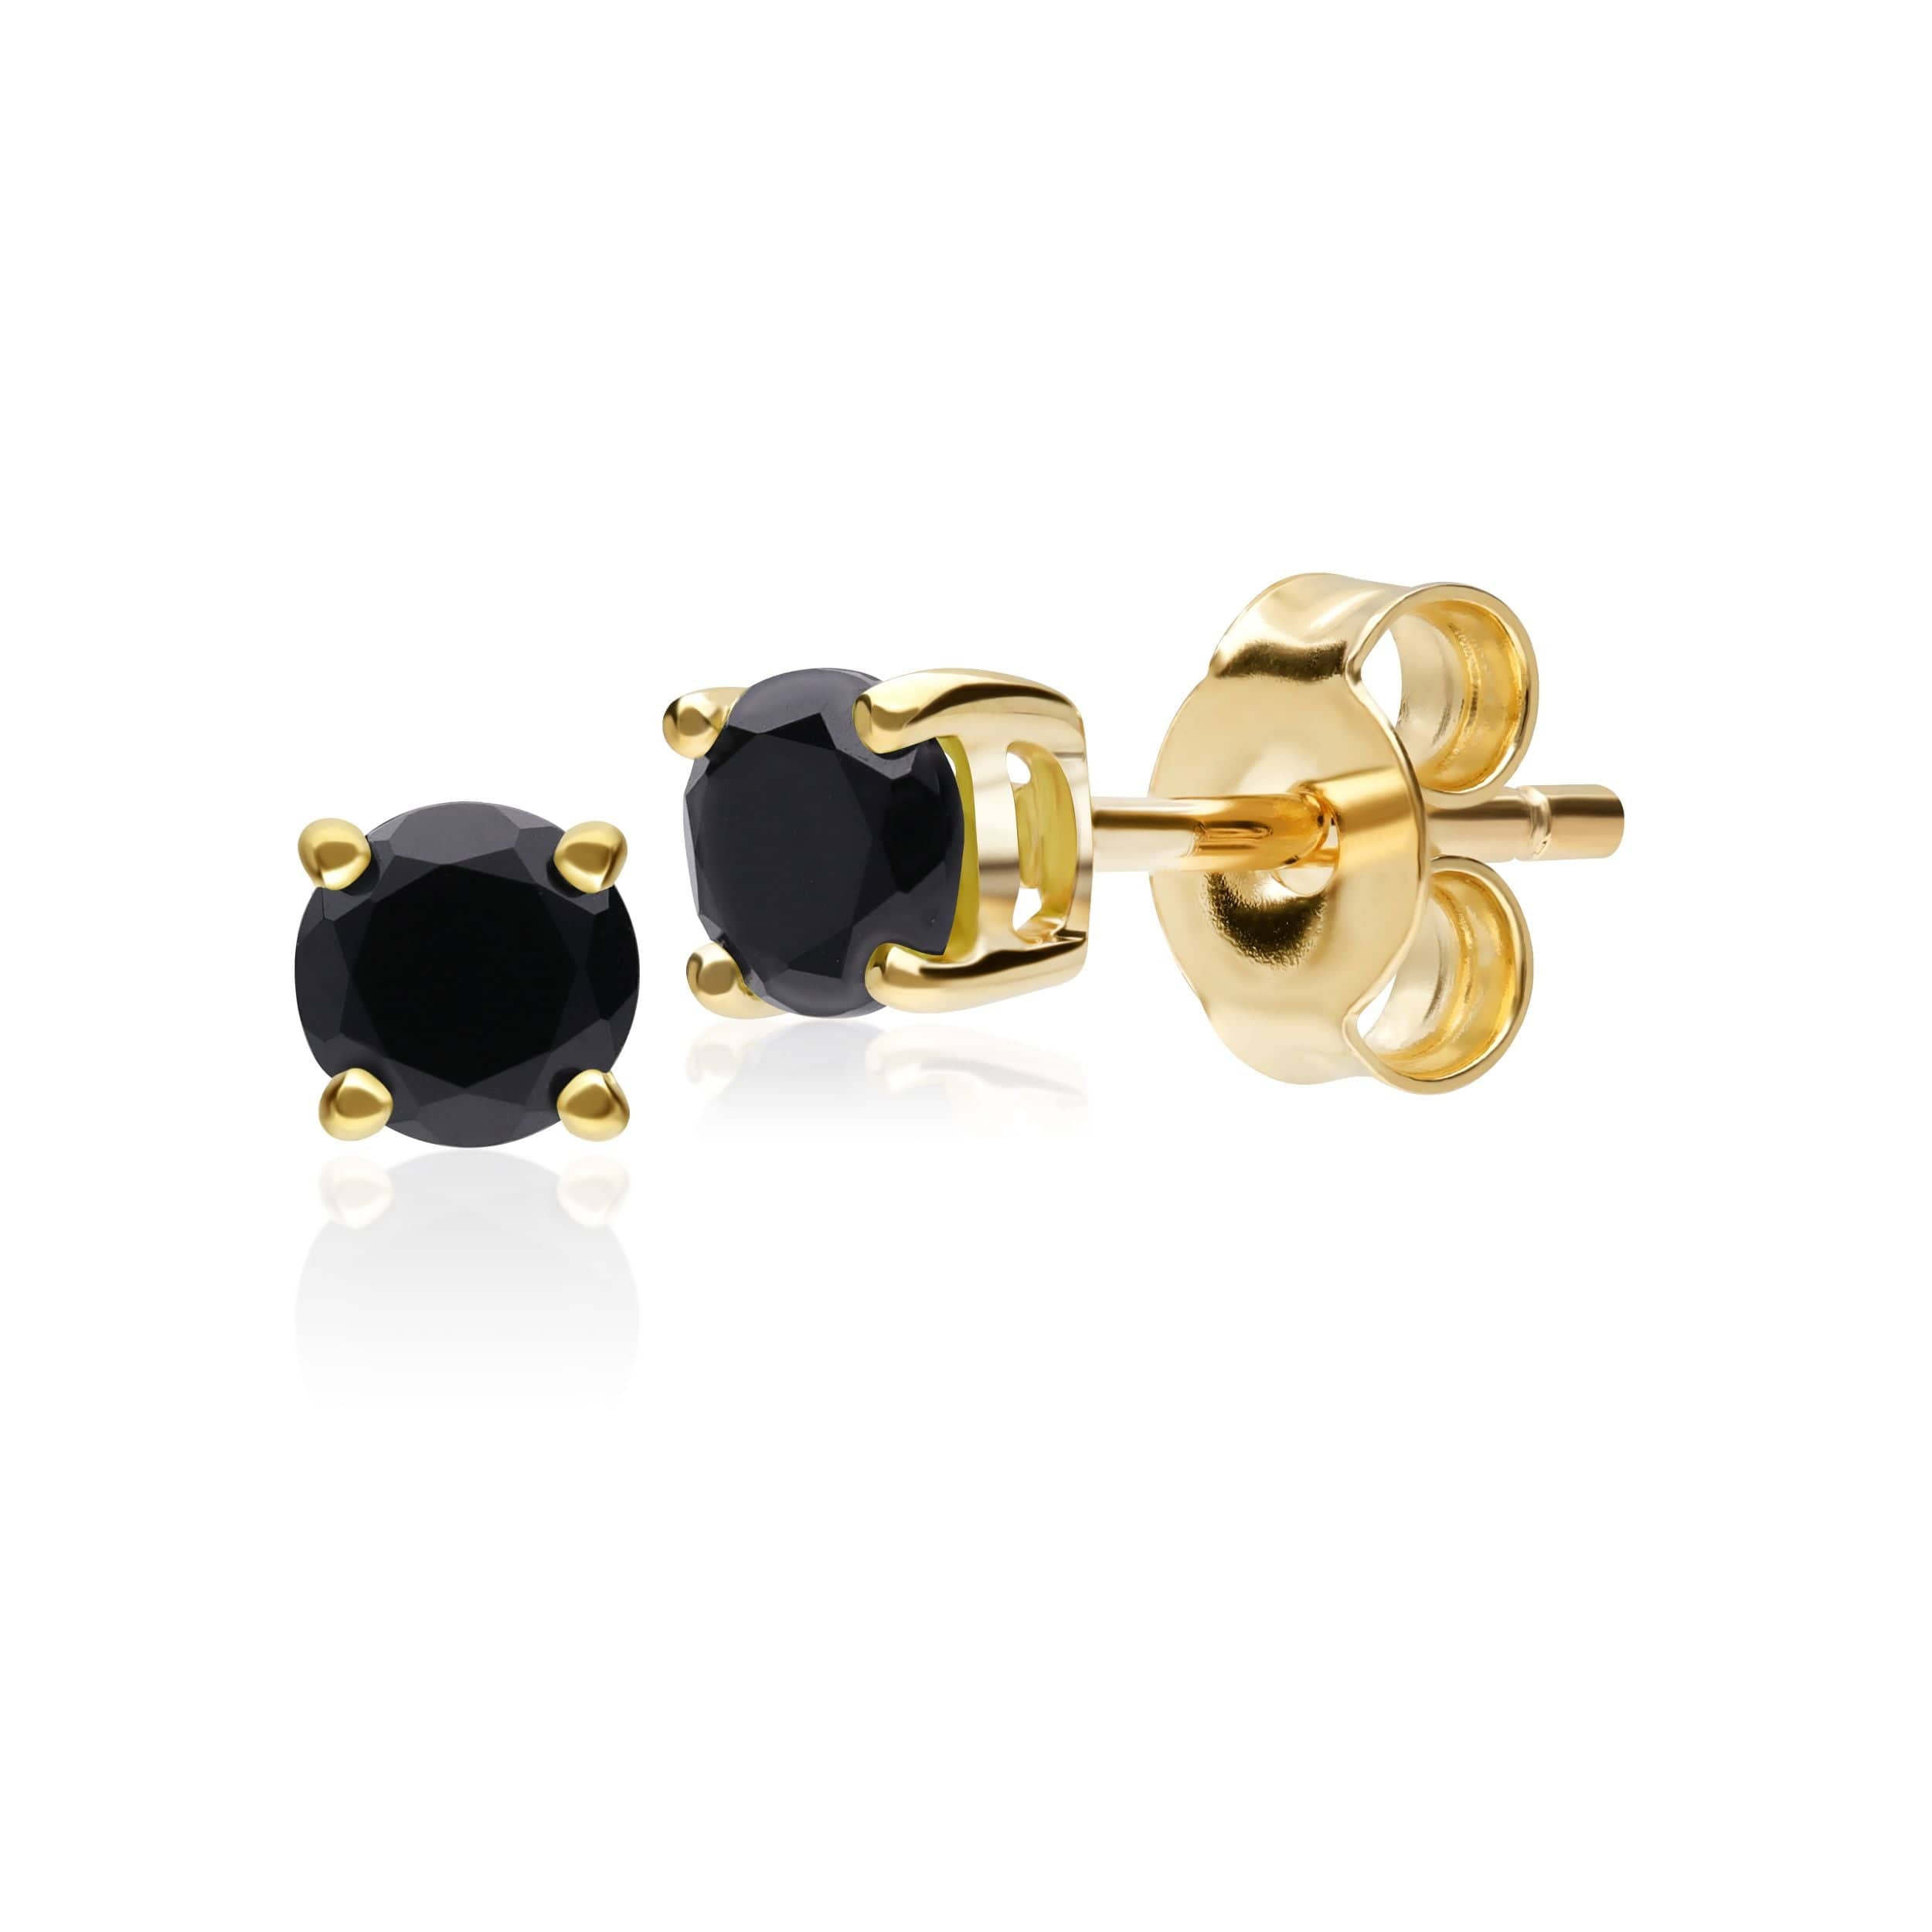 Classic Round Black Onyx Stud Earrings in 9ct Yellow Gold